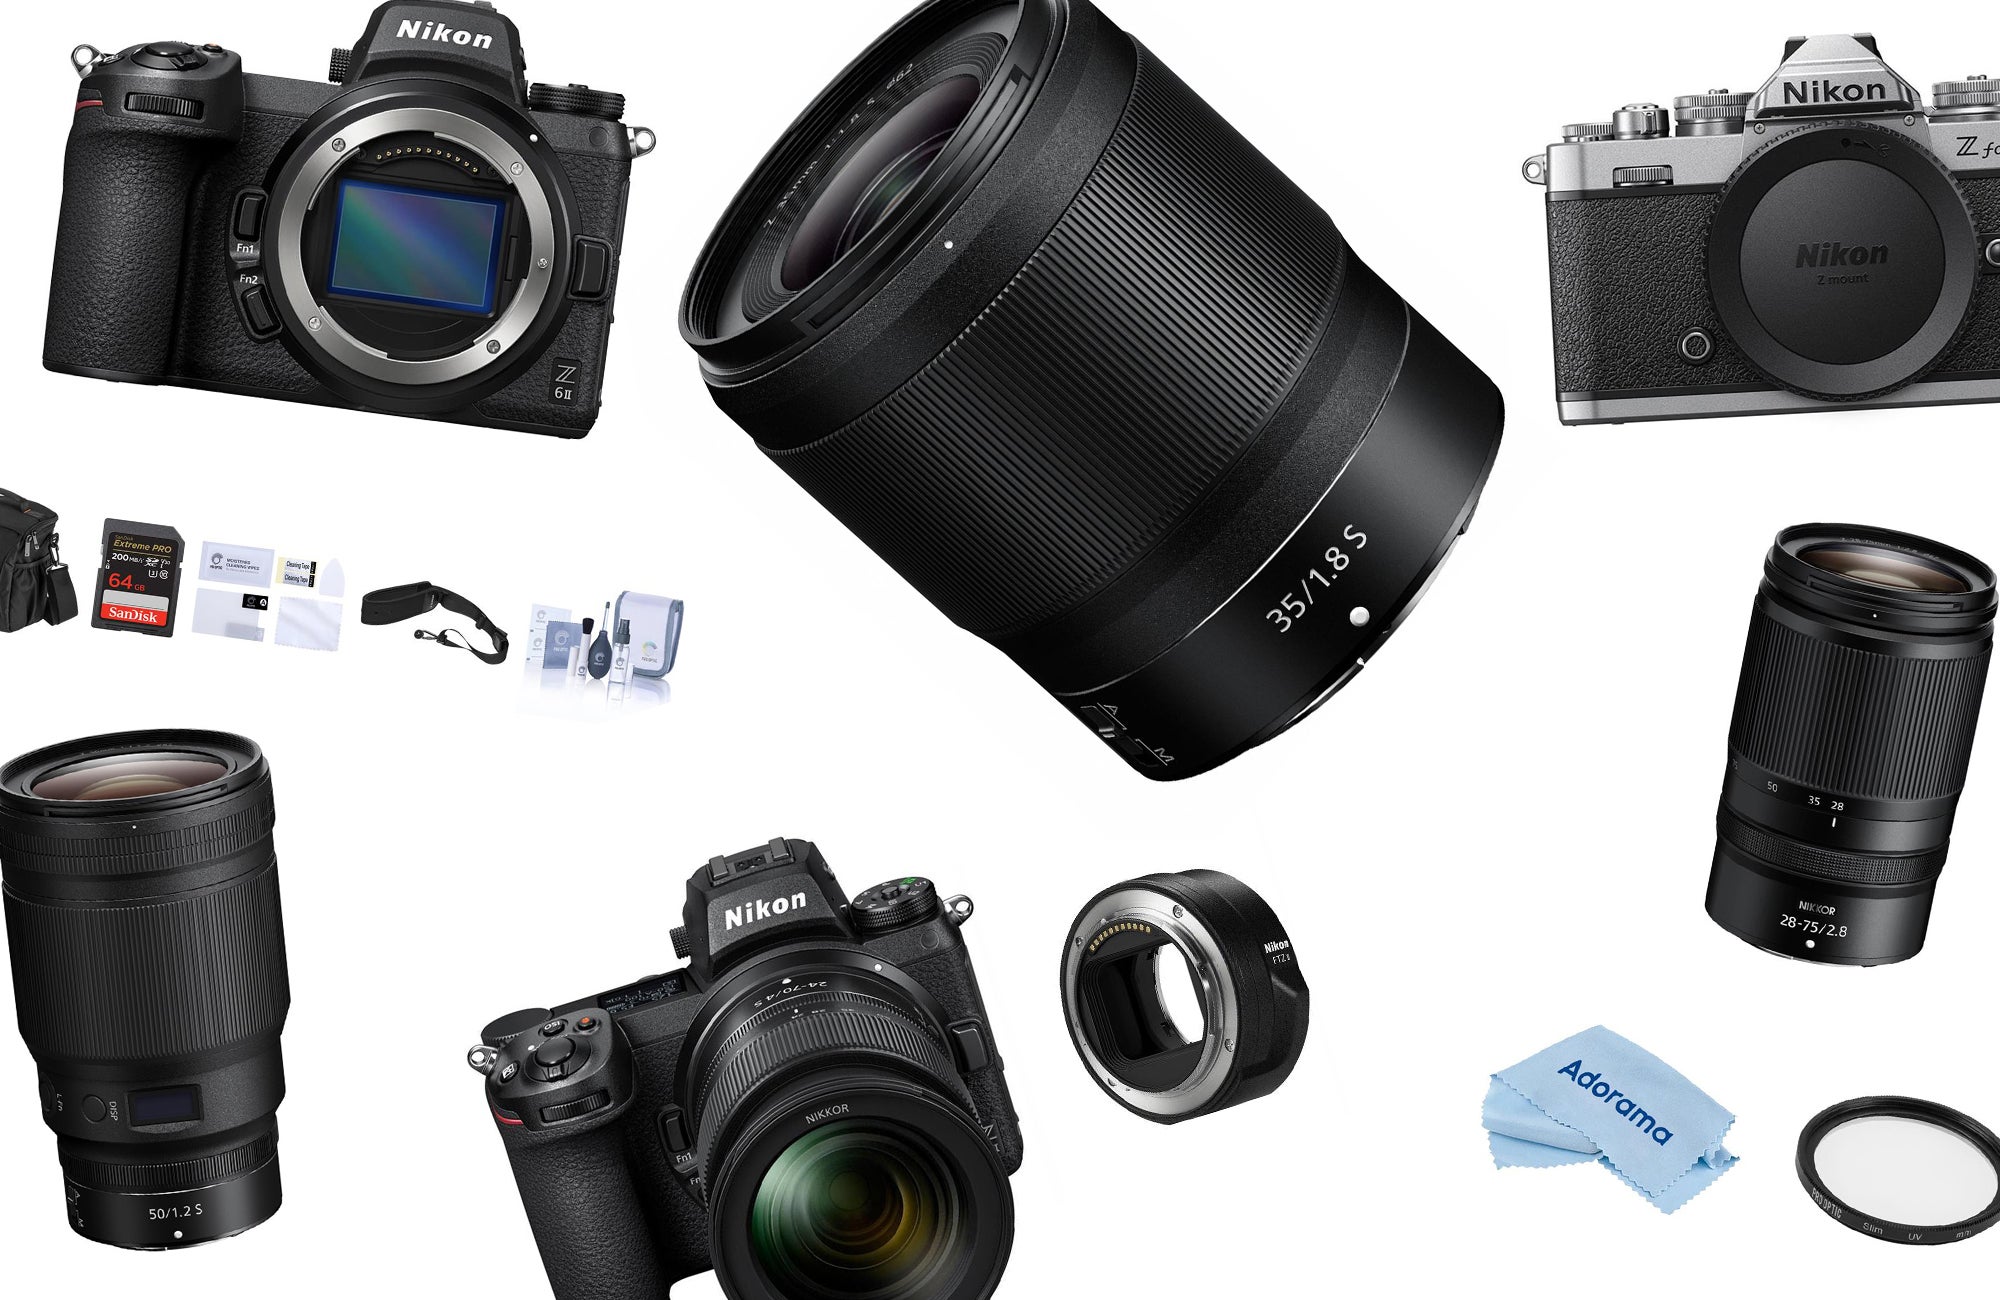 Save up to $500 on Nikon cameras and lenses at Adorama